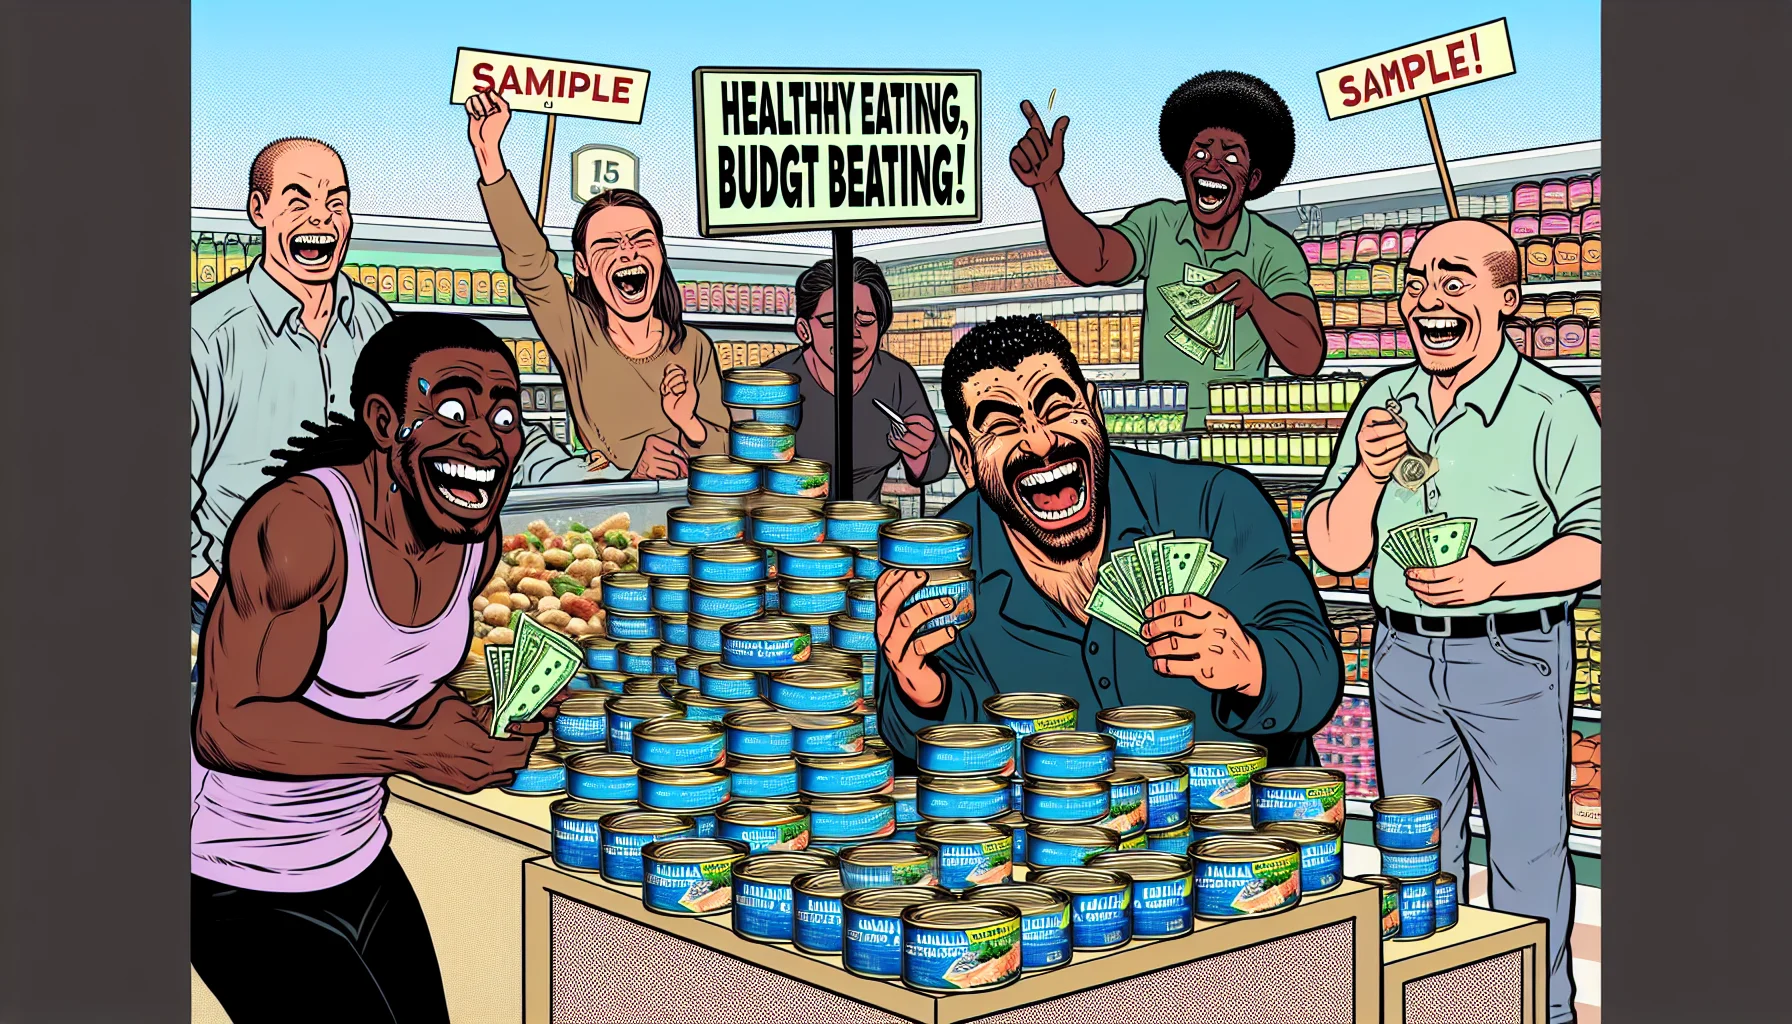 Imagine a hysterically amusing scene taking place in a grocery store. At the center of the scene is a display of sparkling cans of healthy, sustainable, and cost-effective tuna spread. A sign above proclaims 'Healthy Eating, Budget Beating!' An Middle-Eastern man with a wide grin is trying a sample and laughing heartily. A Black woman with an amused smirk pointing at the tuna spread whilst clutching a handful of dollar bills. There are confused and entertained shoppers pausing in their tracks to see what the fuss is about. All these instill a sense of budget-friendly healthy food options.